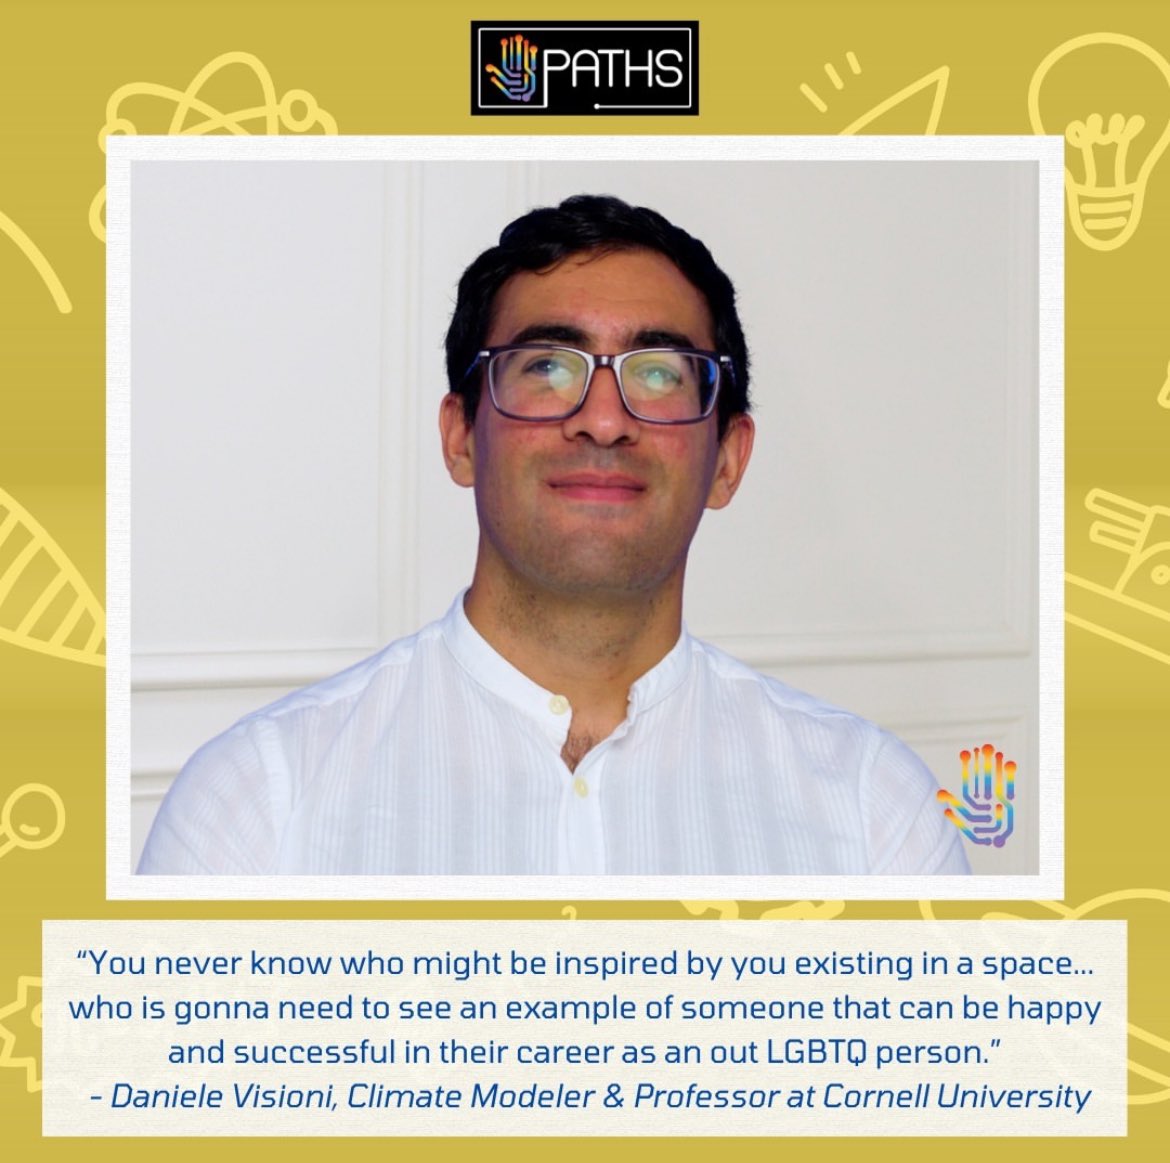 Ok, quite proud of this… Thanks to @LGBTTech for the opportunity to share in this interview a bit of my life story and chat mentoring and mentorship as a LGBTQ+ person in STEM. This meant a lot to me, there were a lot of things I’ve wanted to say for a while!